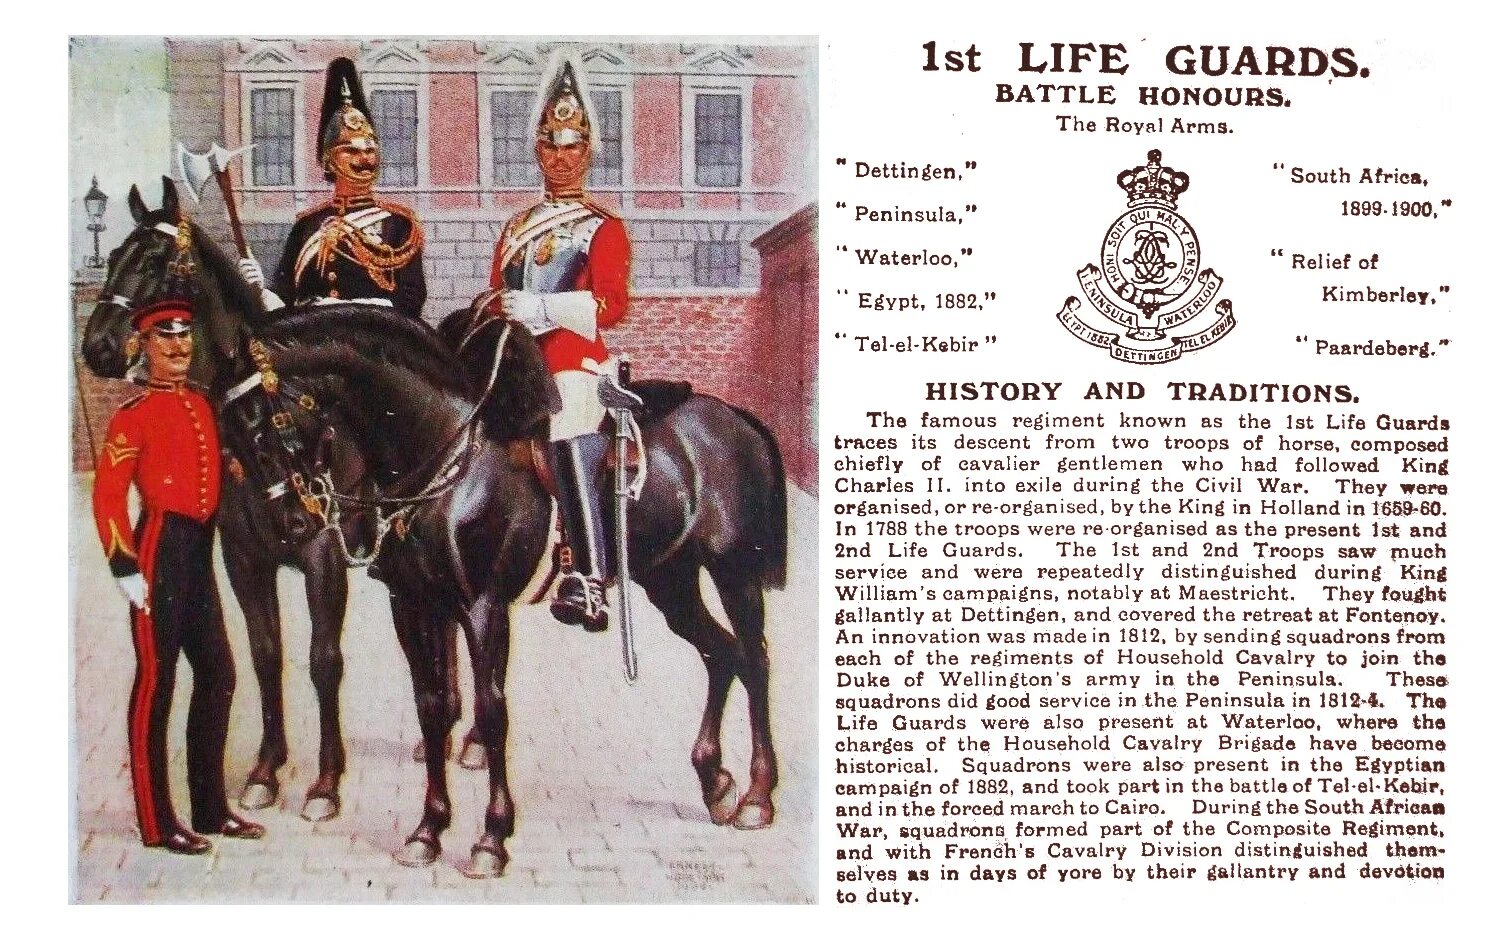 1st Regiment of Life Guards. (The Life Guards) Великобритания. 1st Regiment of Life Guards Colour. Турецкие Life Guard. History and traditions